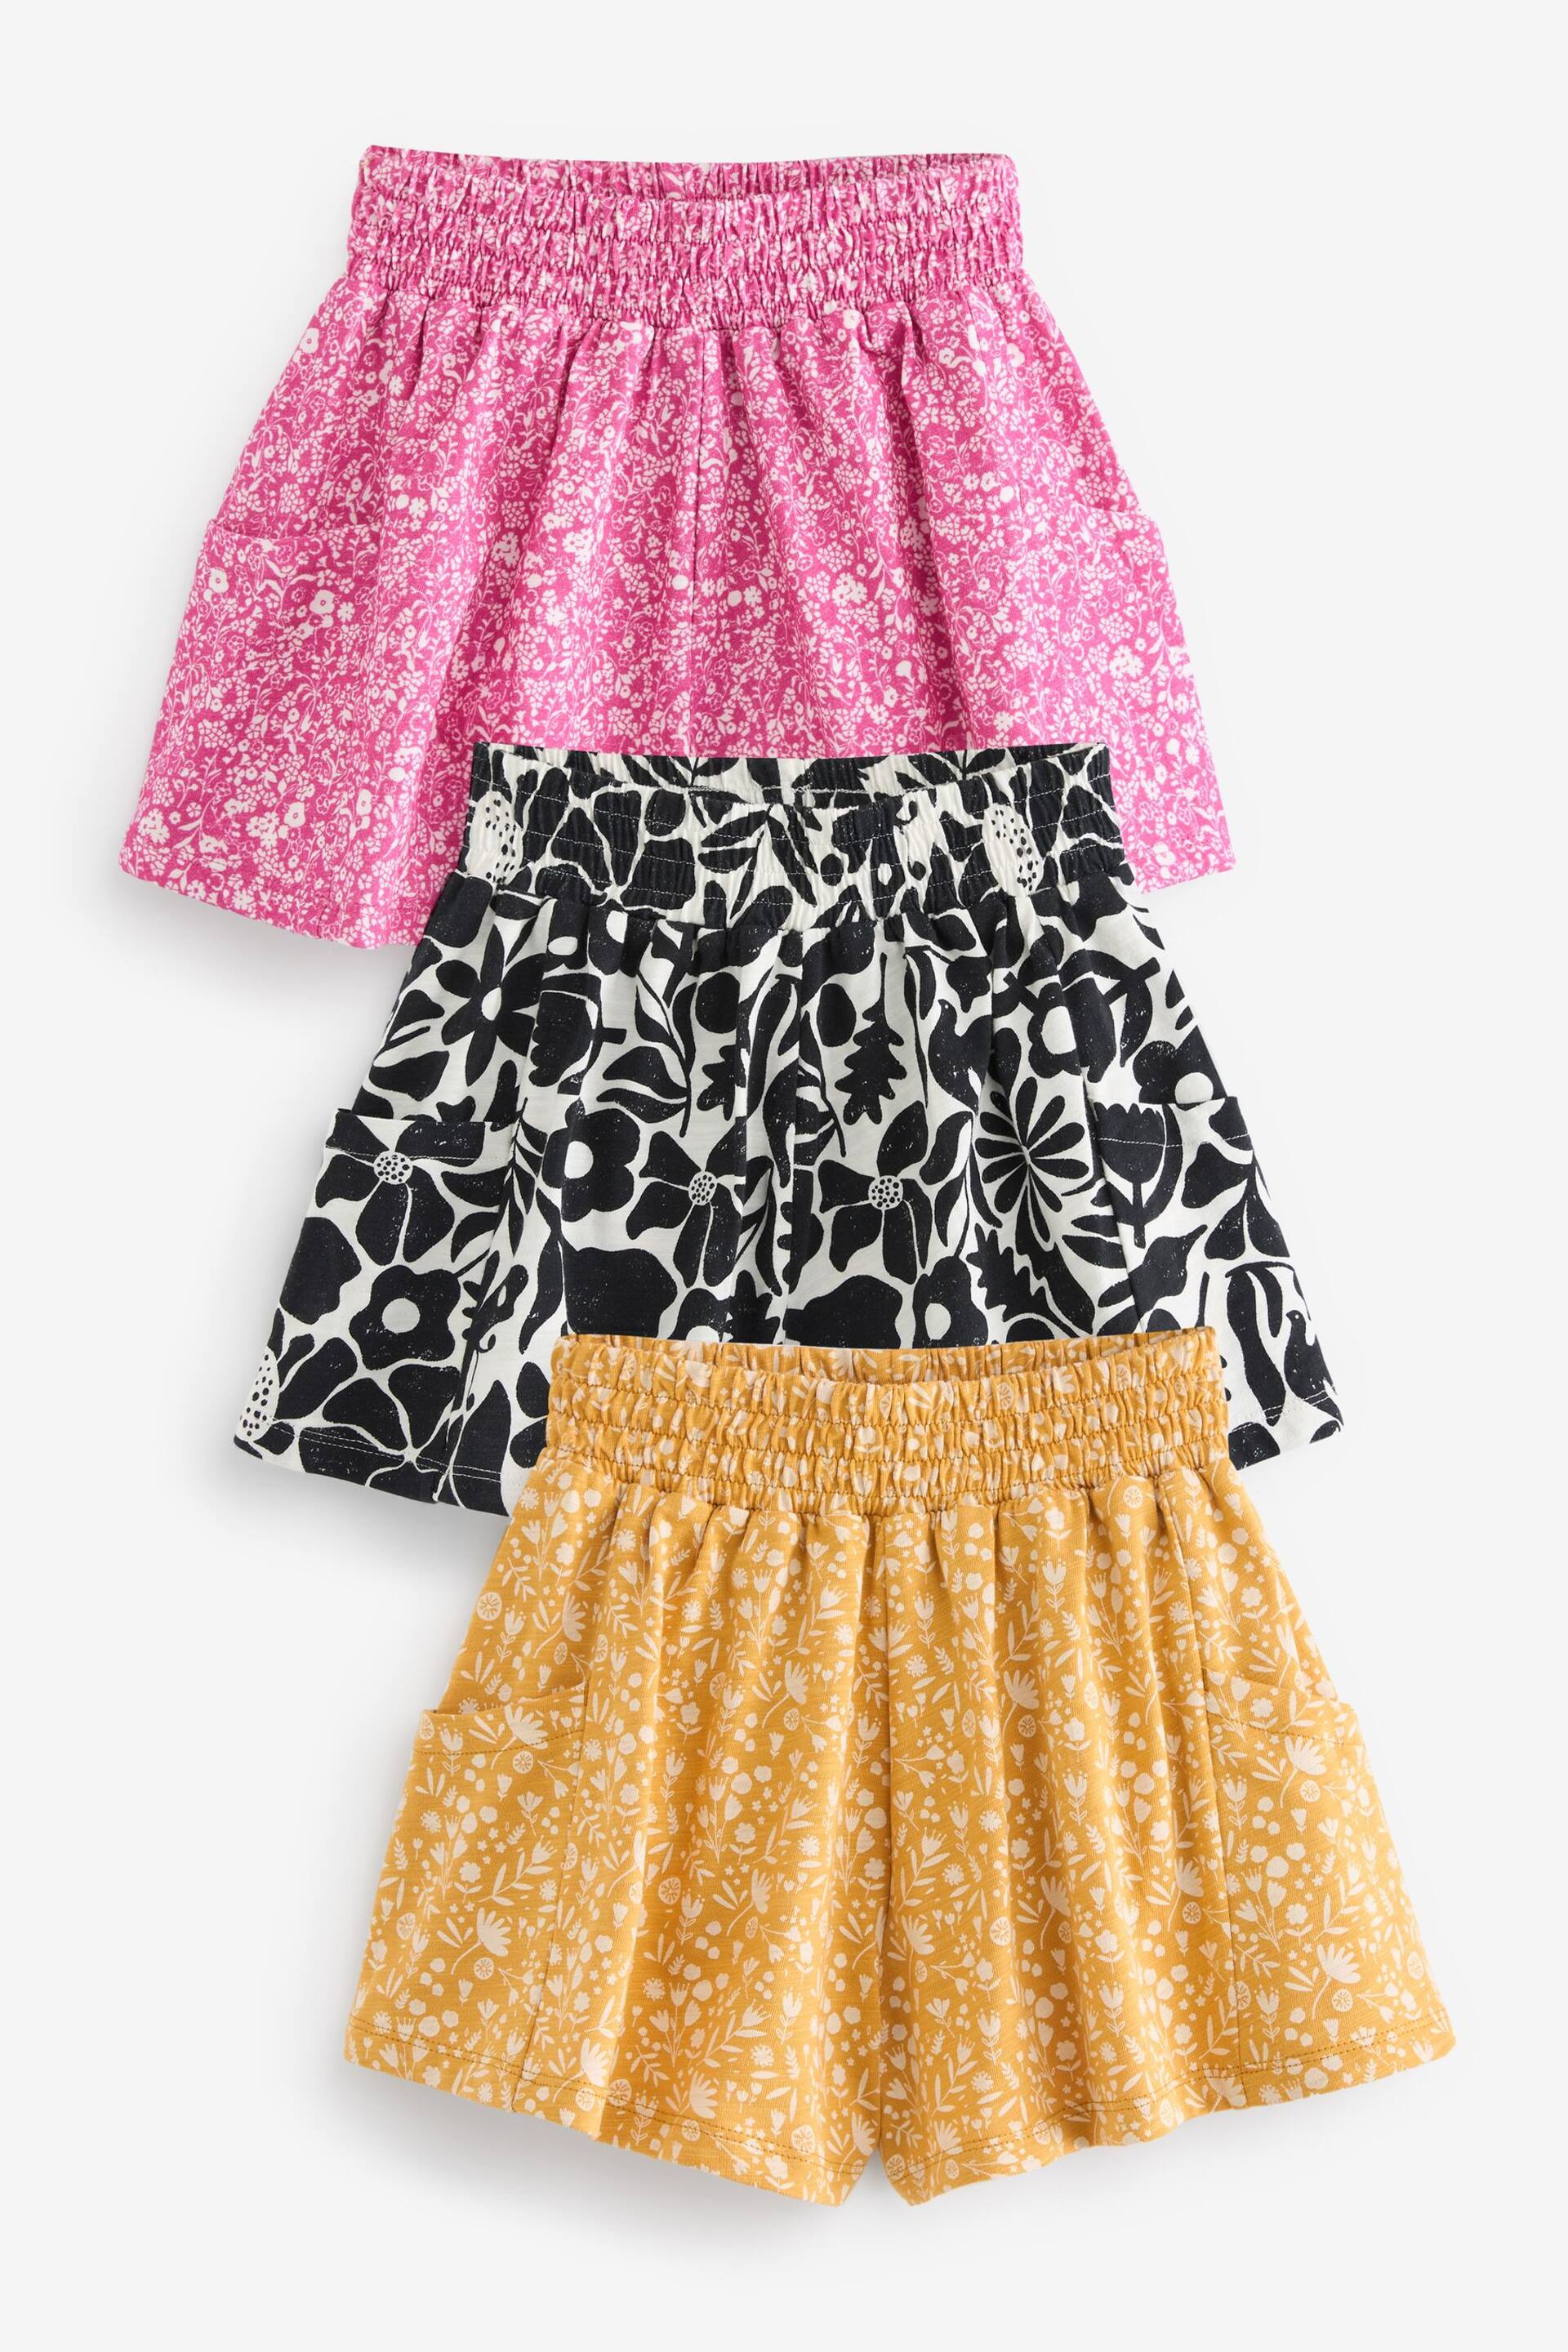 Monochrome/Ochre/PInk Shorts 3 Pack (3-16yrs) - Image 1 of 3